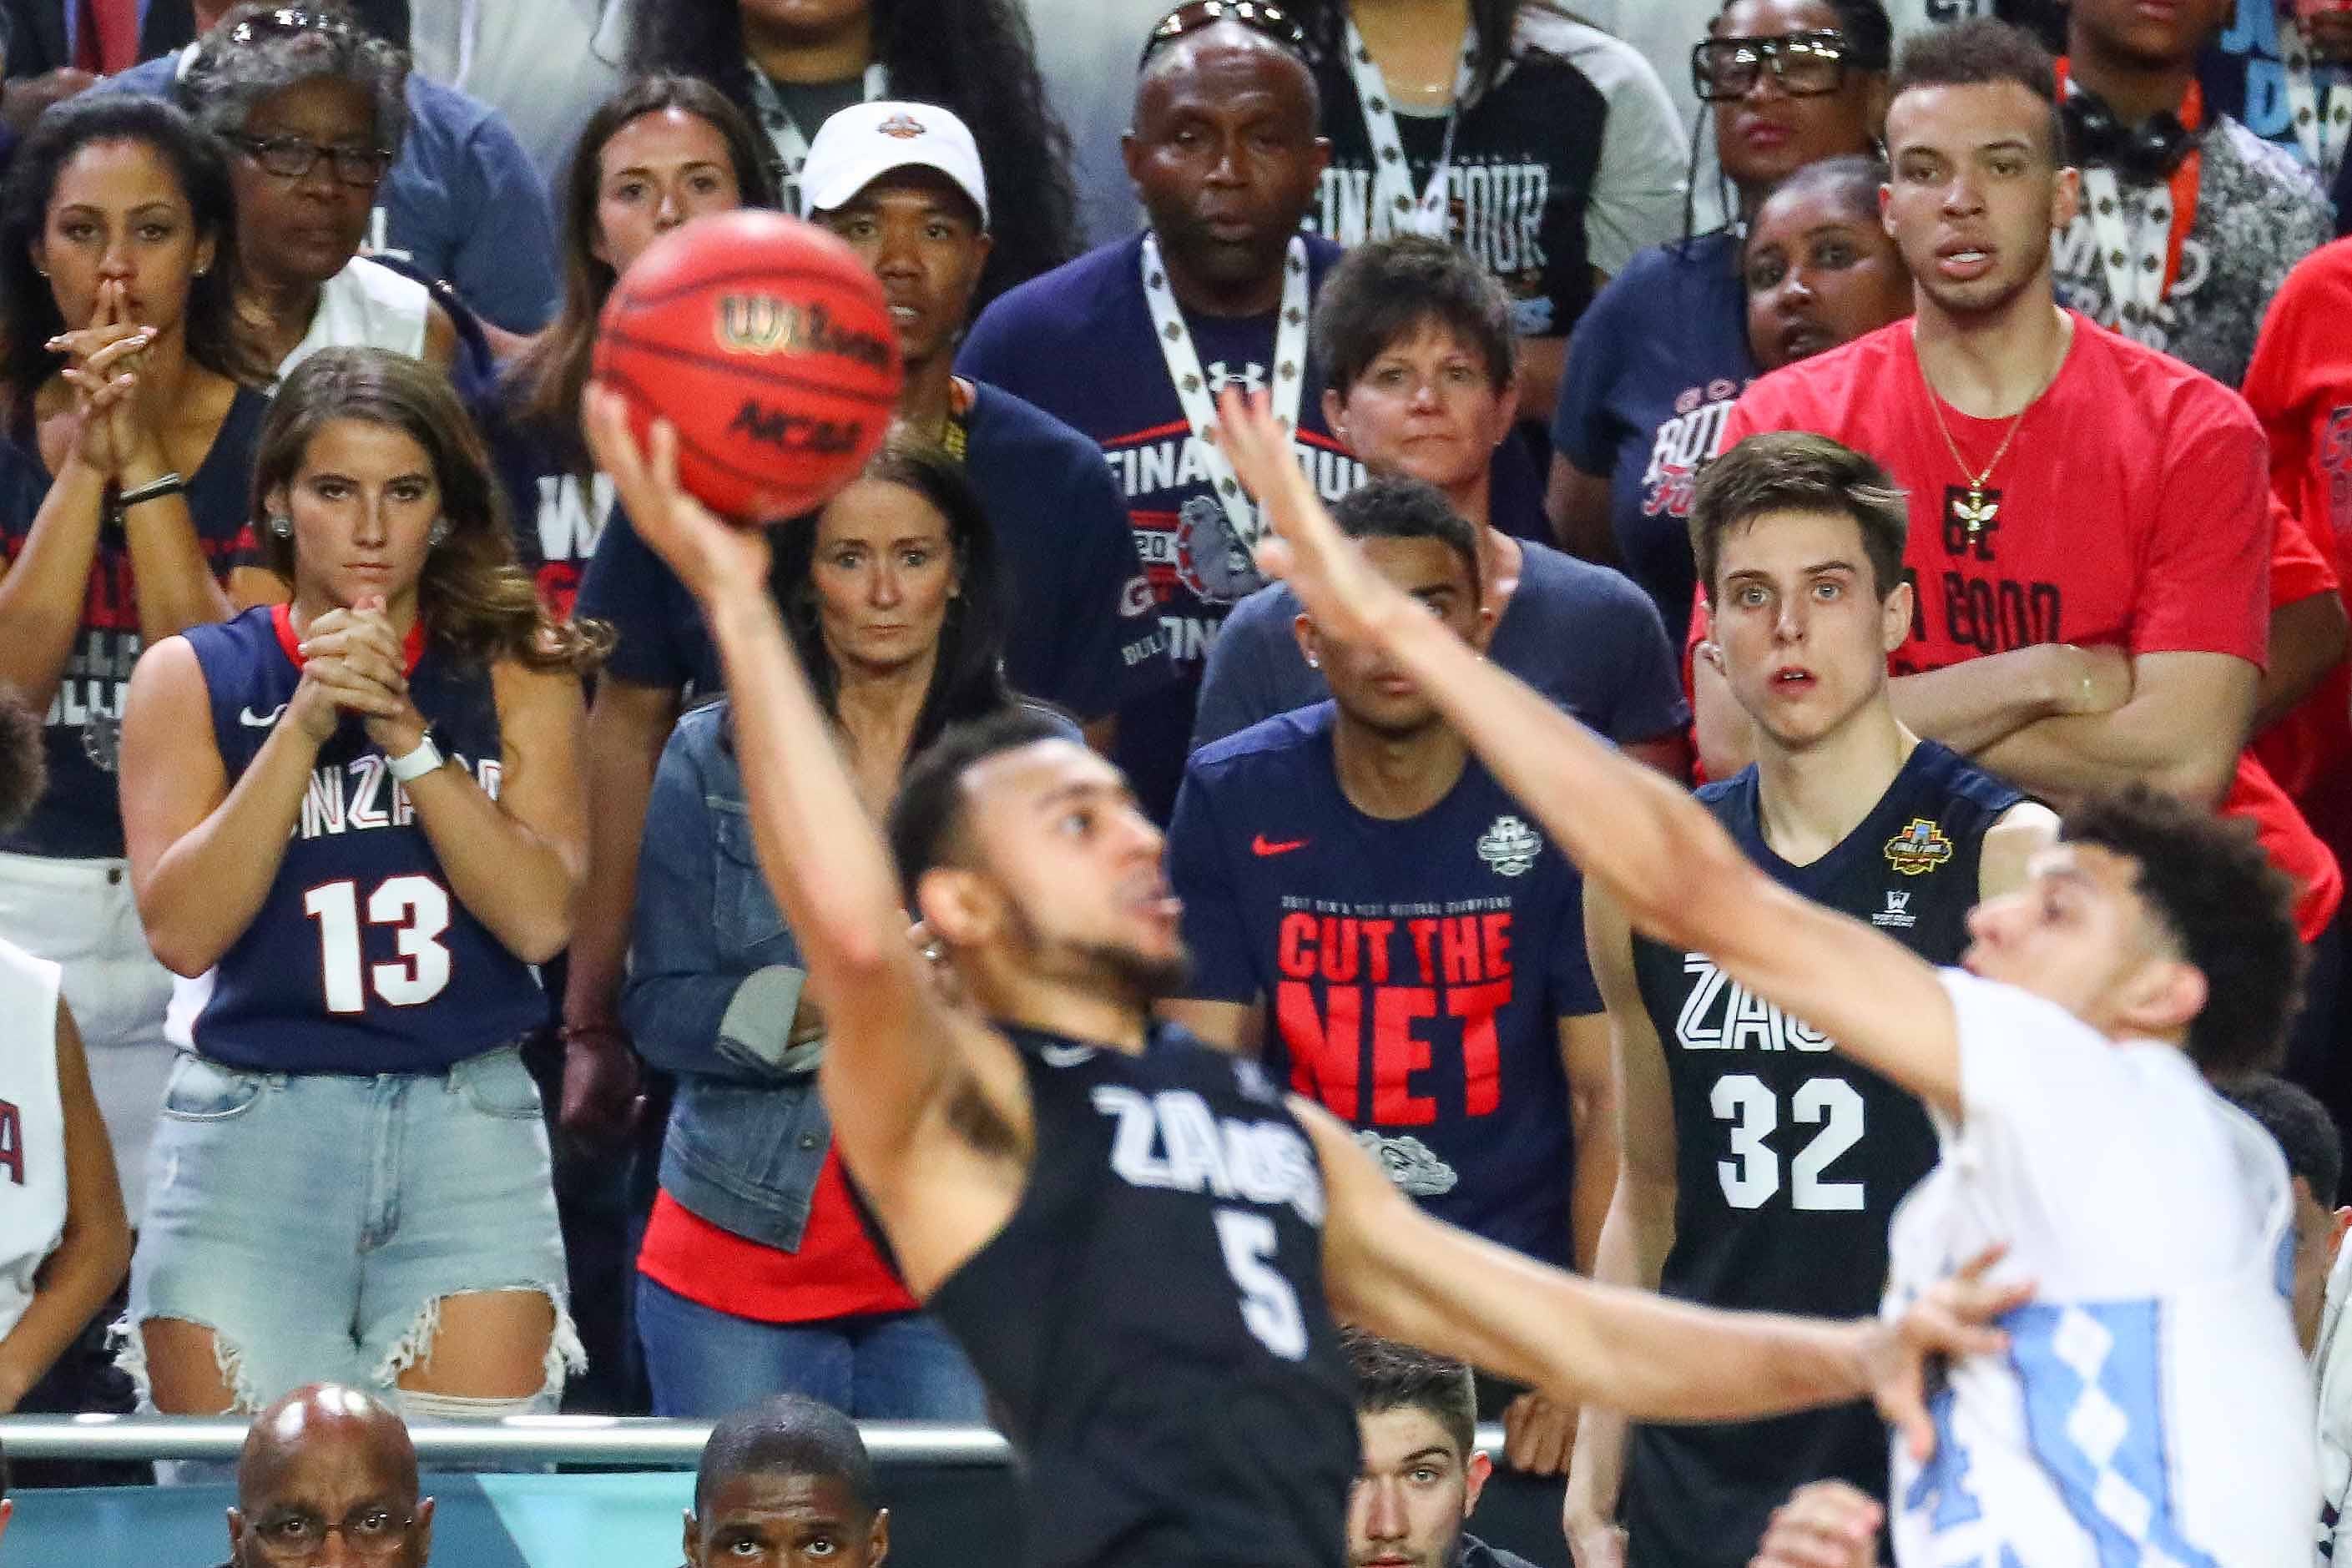 What Zag fans are saying after a tough loss to North Carolina